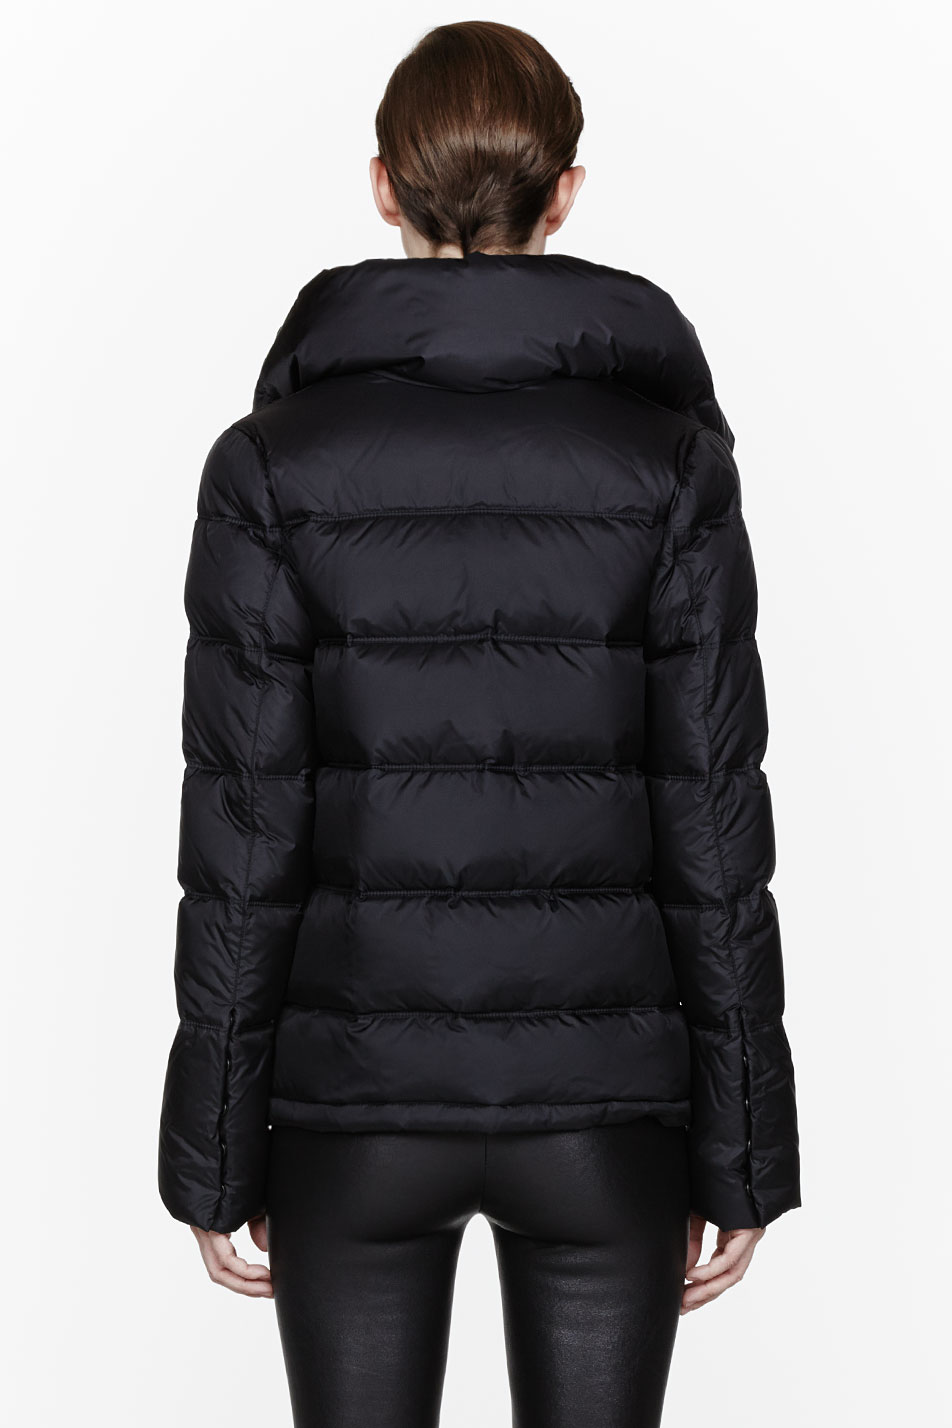 Givenchy Black Nylon Look 27 Down Puffer Jacket in Black | Lyst